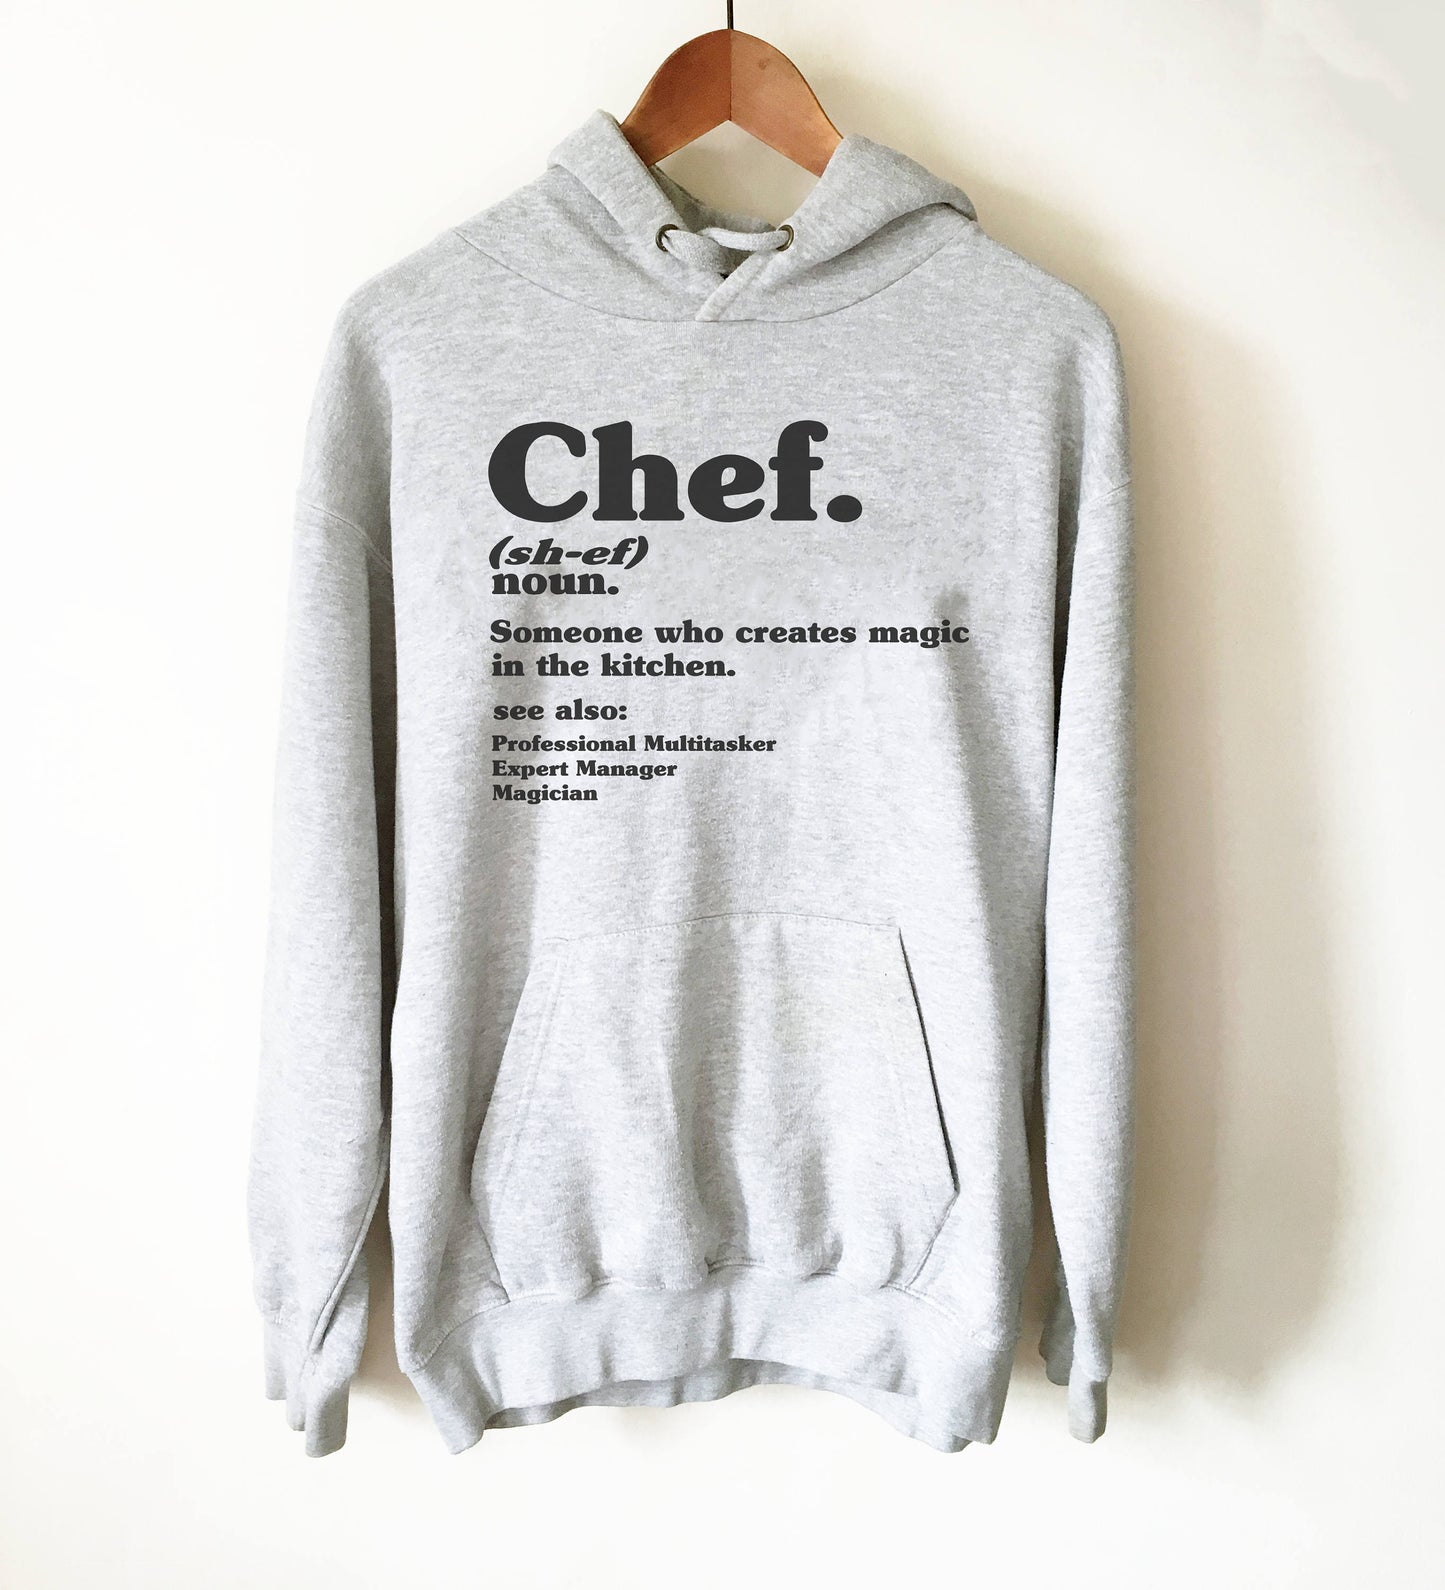 Chef Dictionary Definition Hoodie - Chef shirt, Chef gift, Cooking shirt, Foodie shirt, Cooking gift, Culinary gifts, Food shirt, Sous chef